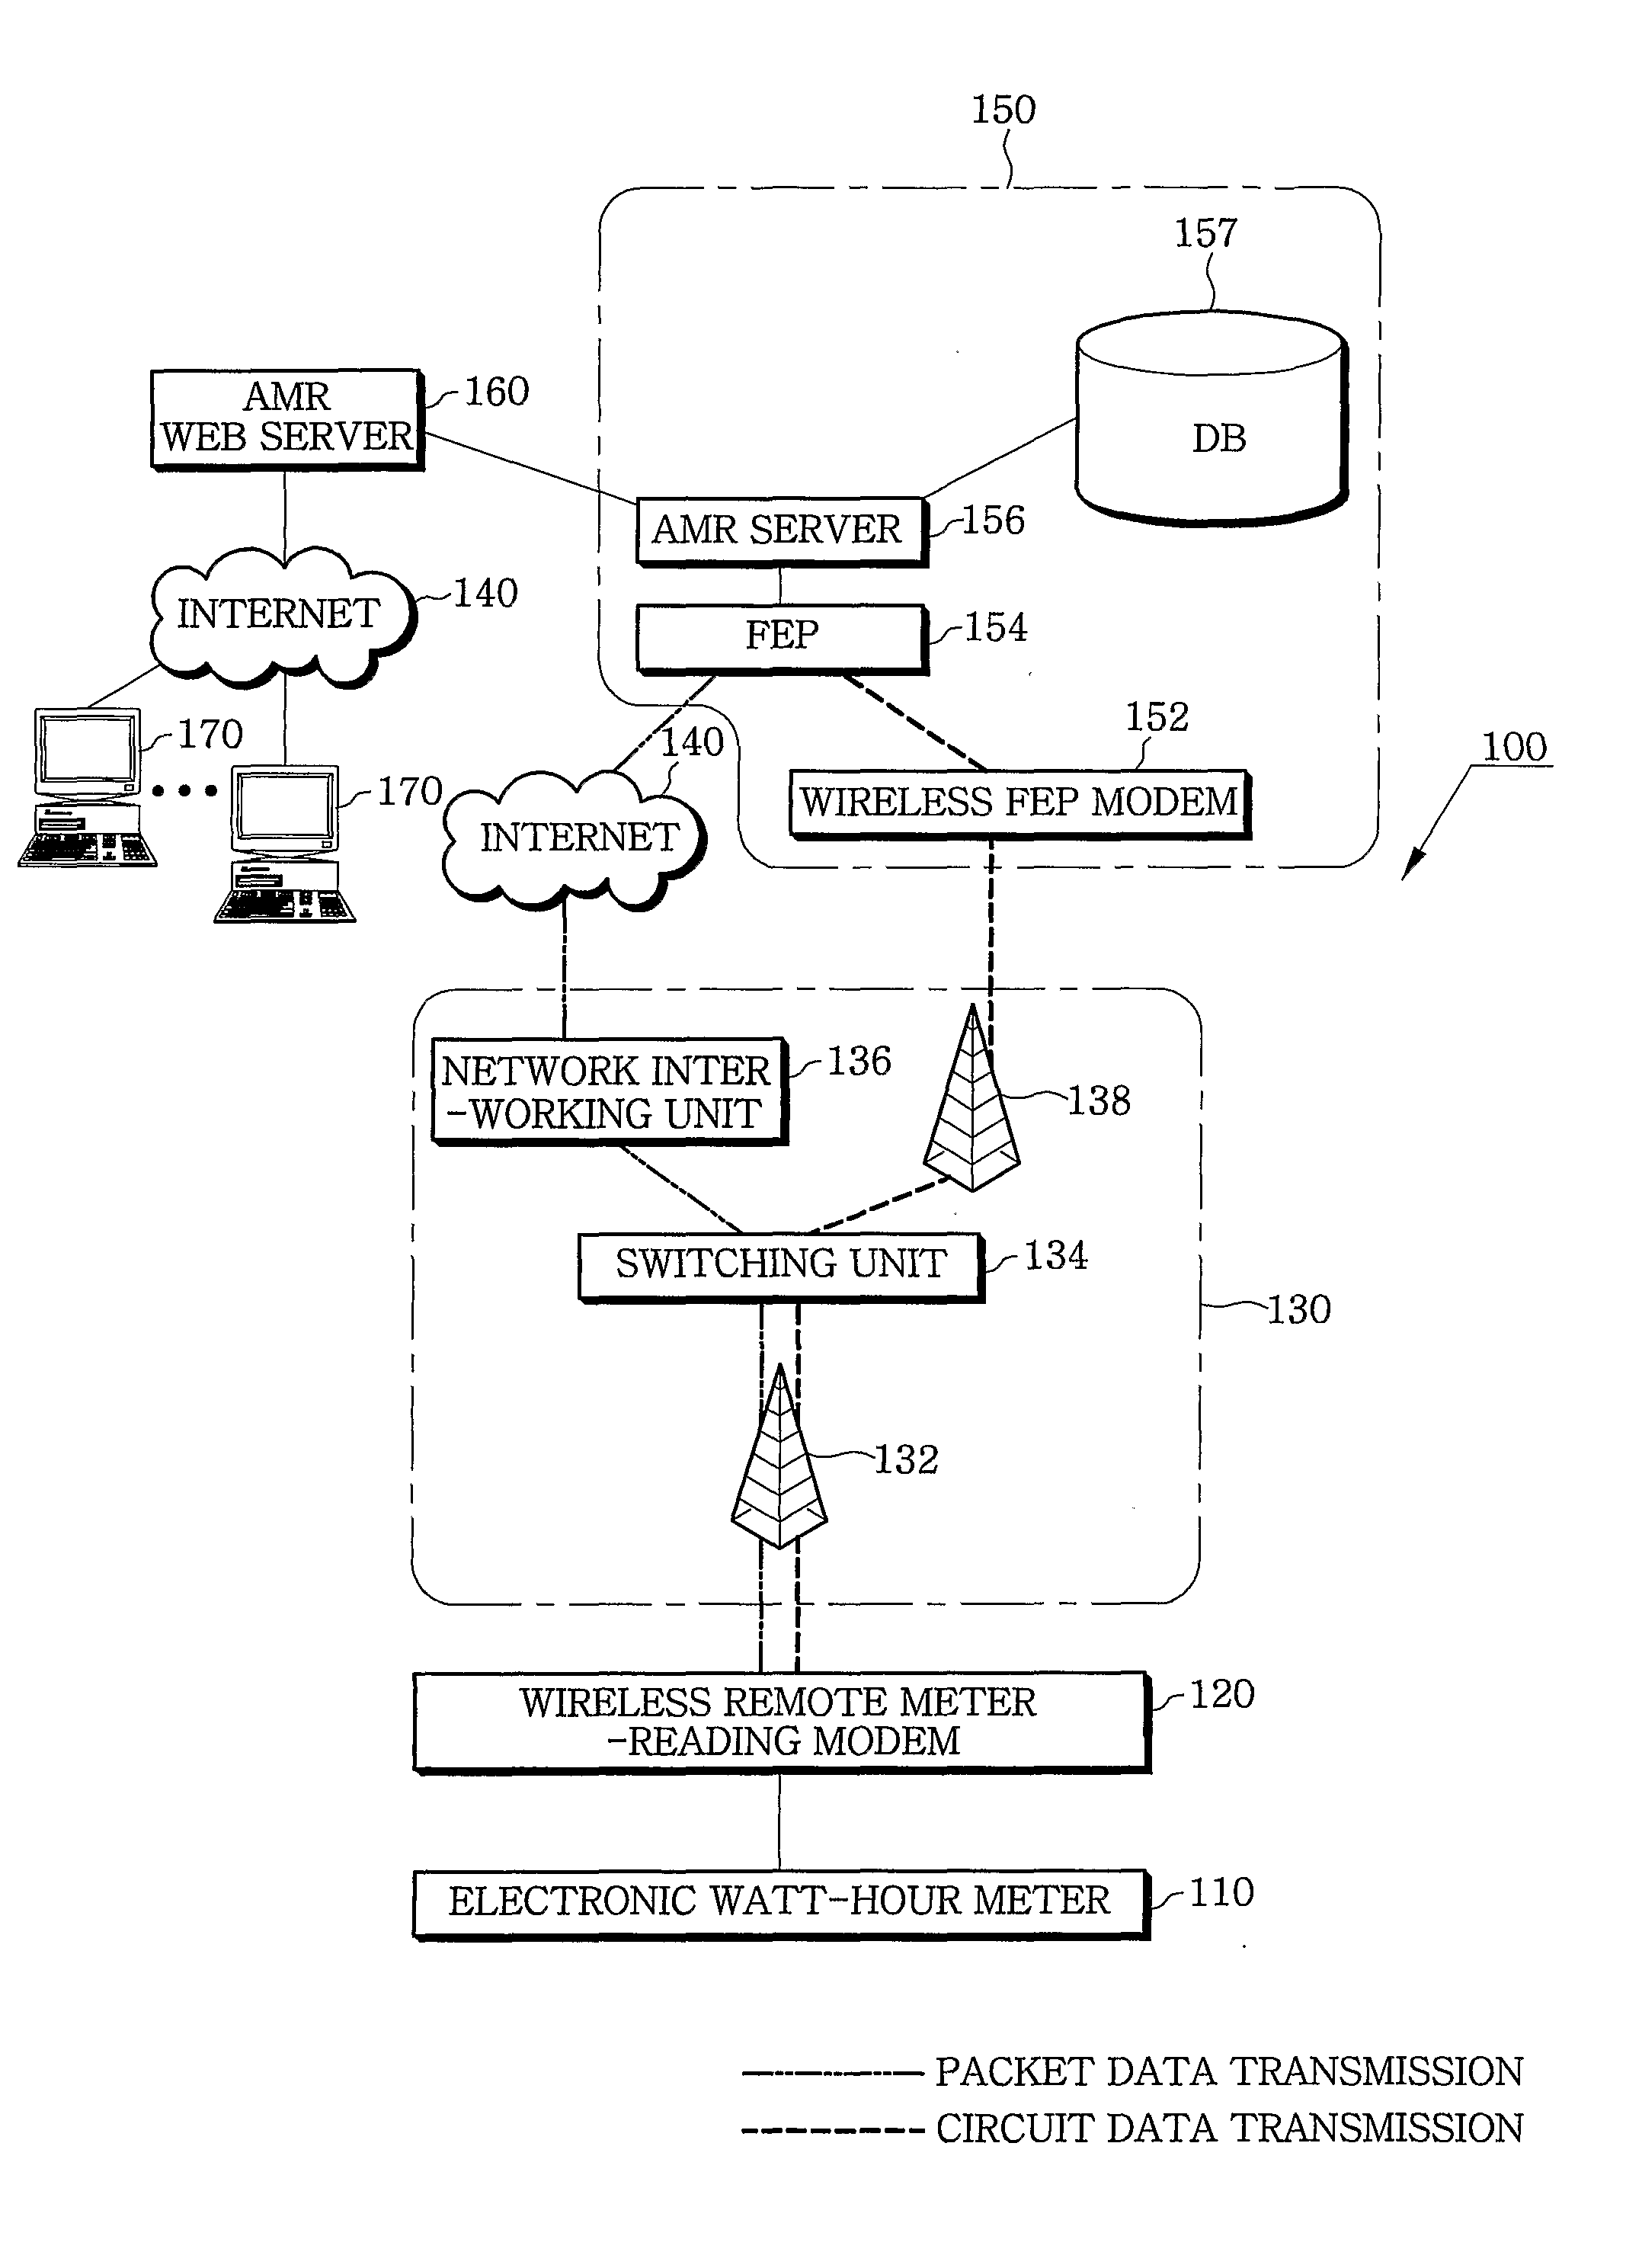 Remote meter-reading system and method using duplicated data transmission of packet data transmission and circuit data transmission